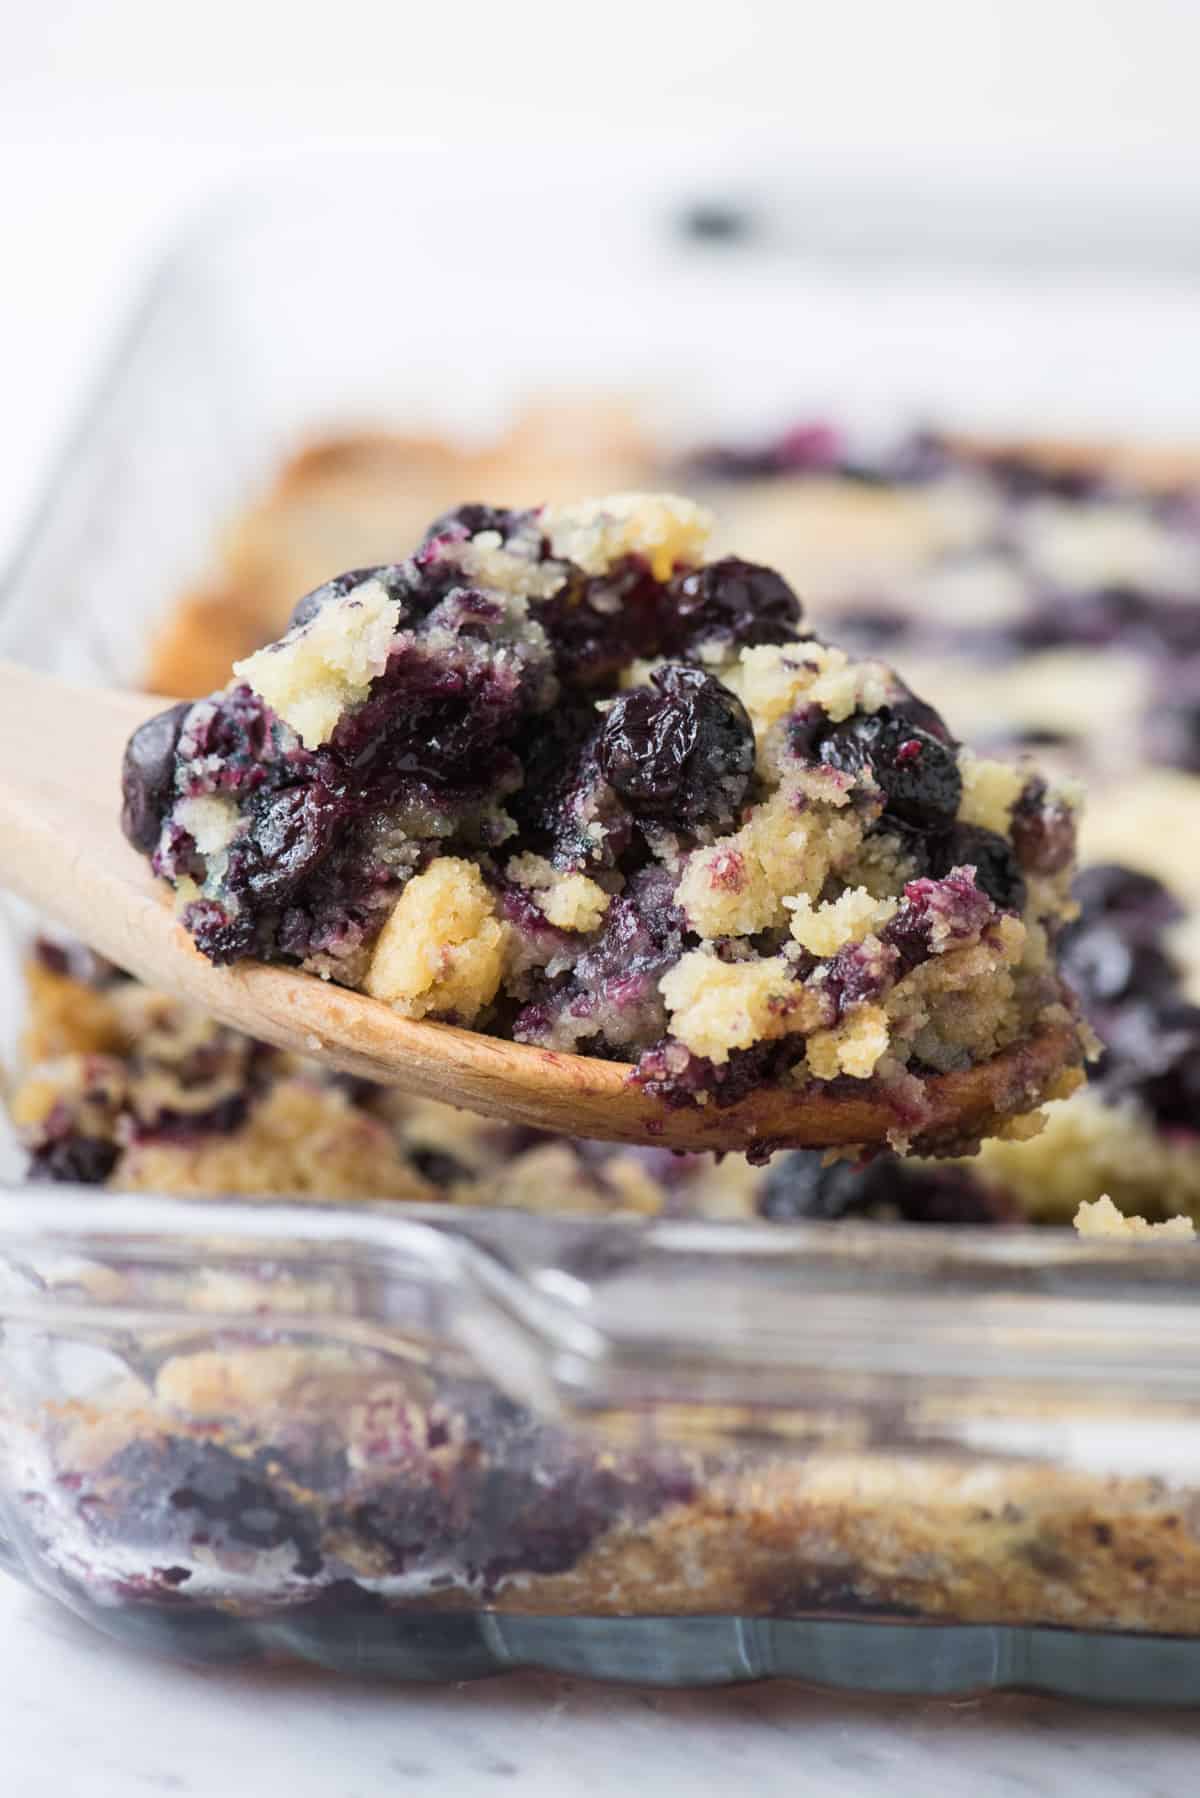 lemon blueberry dump cake in glass 9x13 inch pan with wooden spoon scooping some out